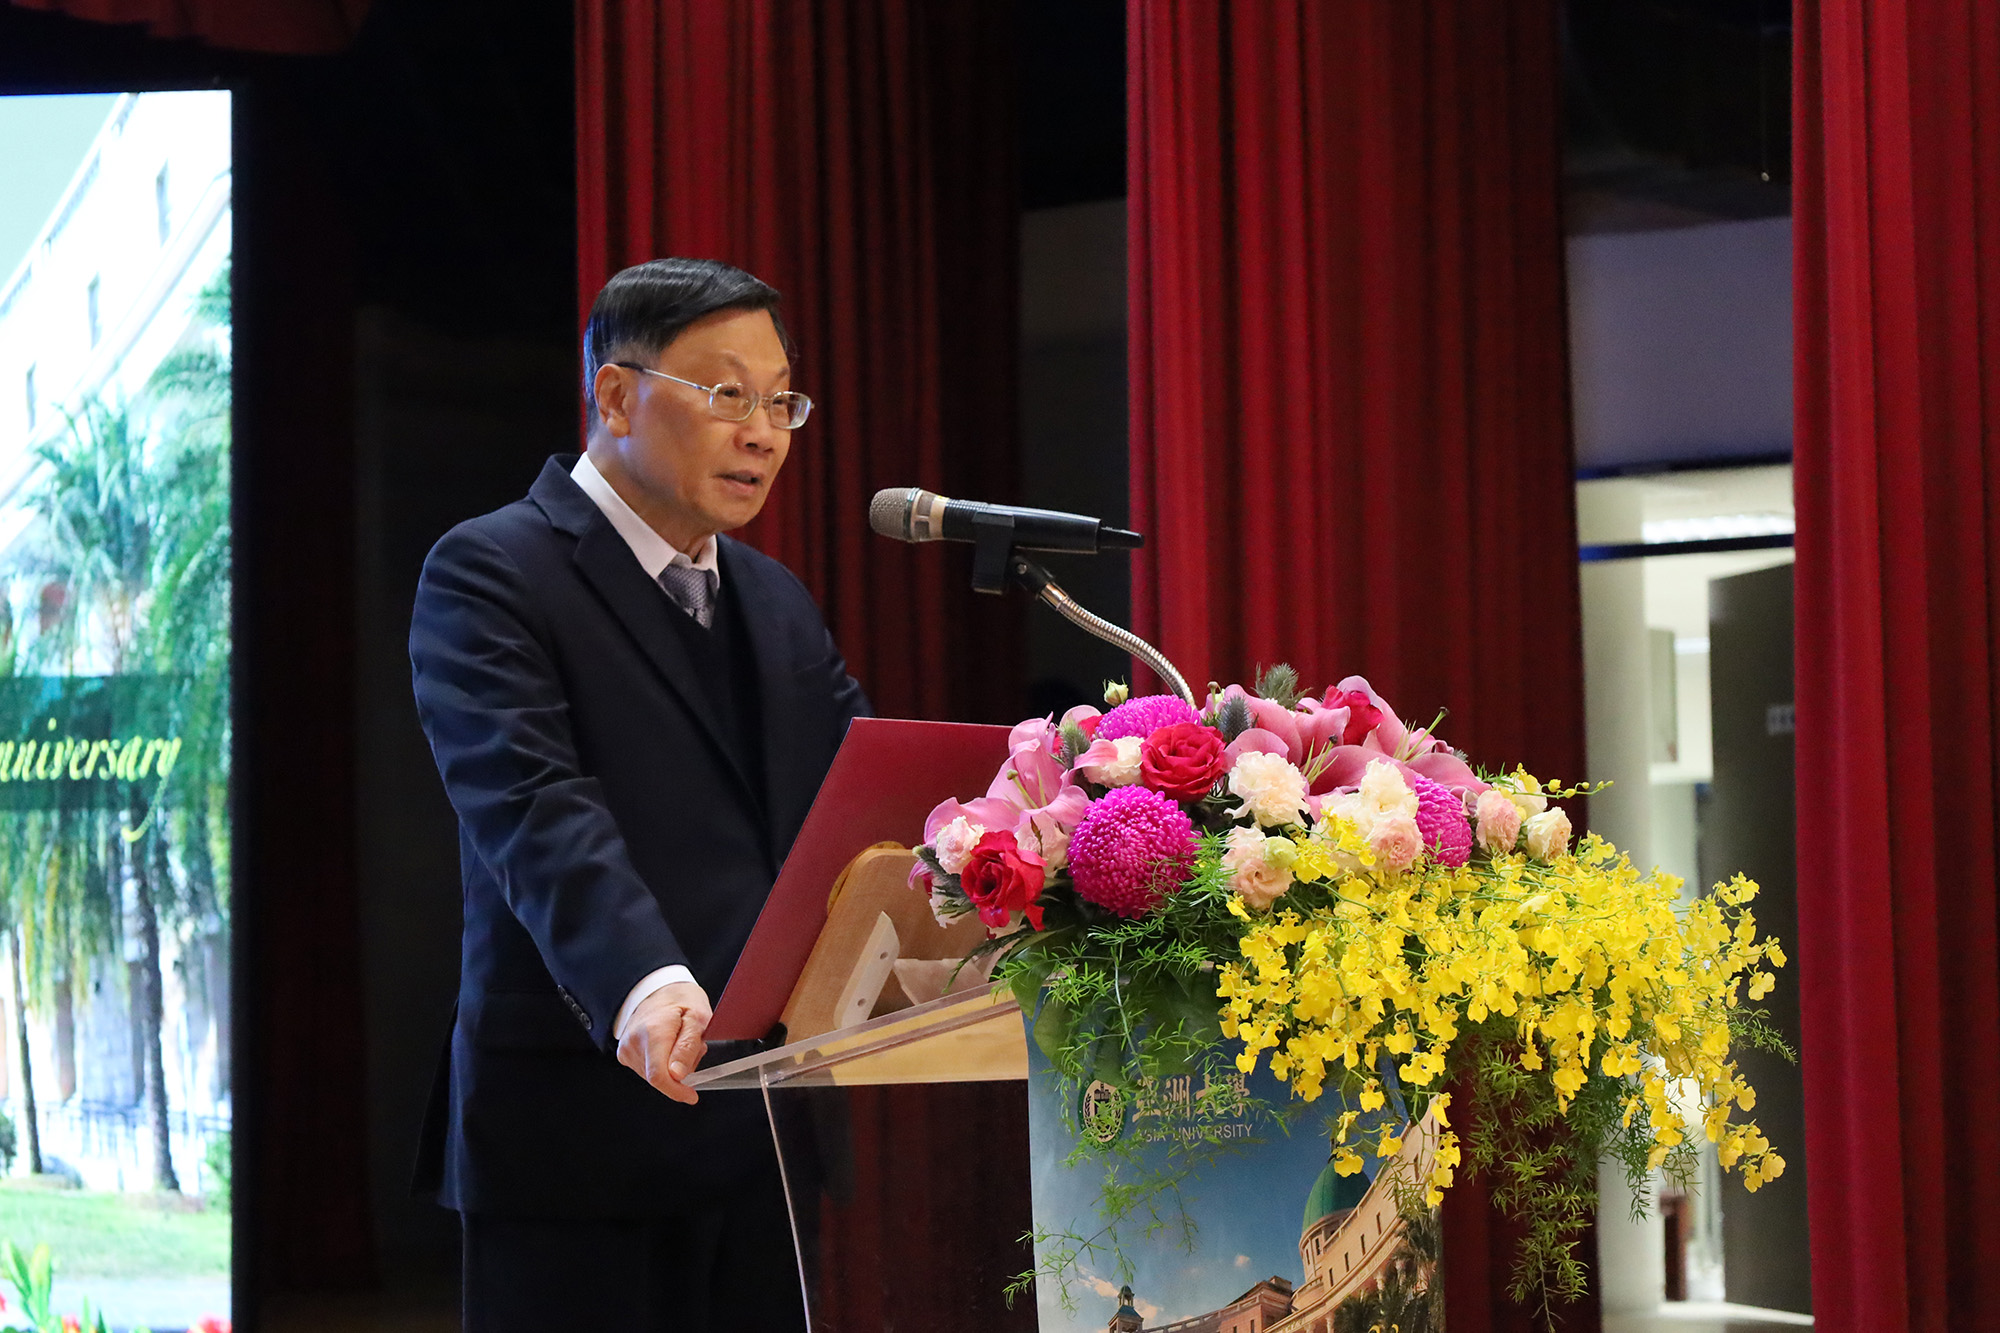 President Jeffrey J.P. Tsai of Asia University expressed gratitude, welcoming Asia University's 23rd anniversary with a grateful heart